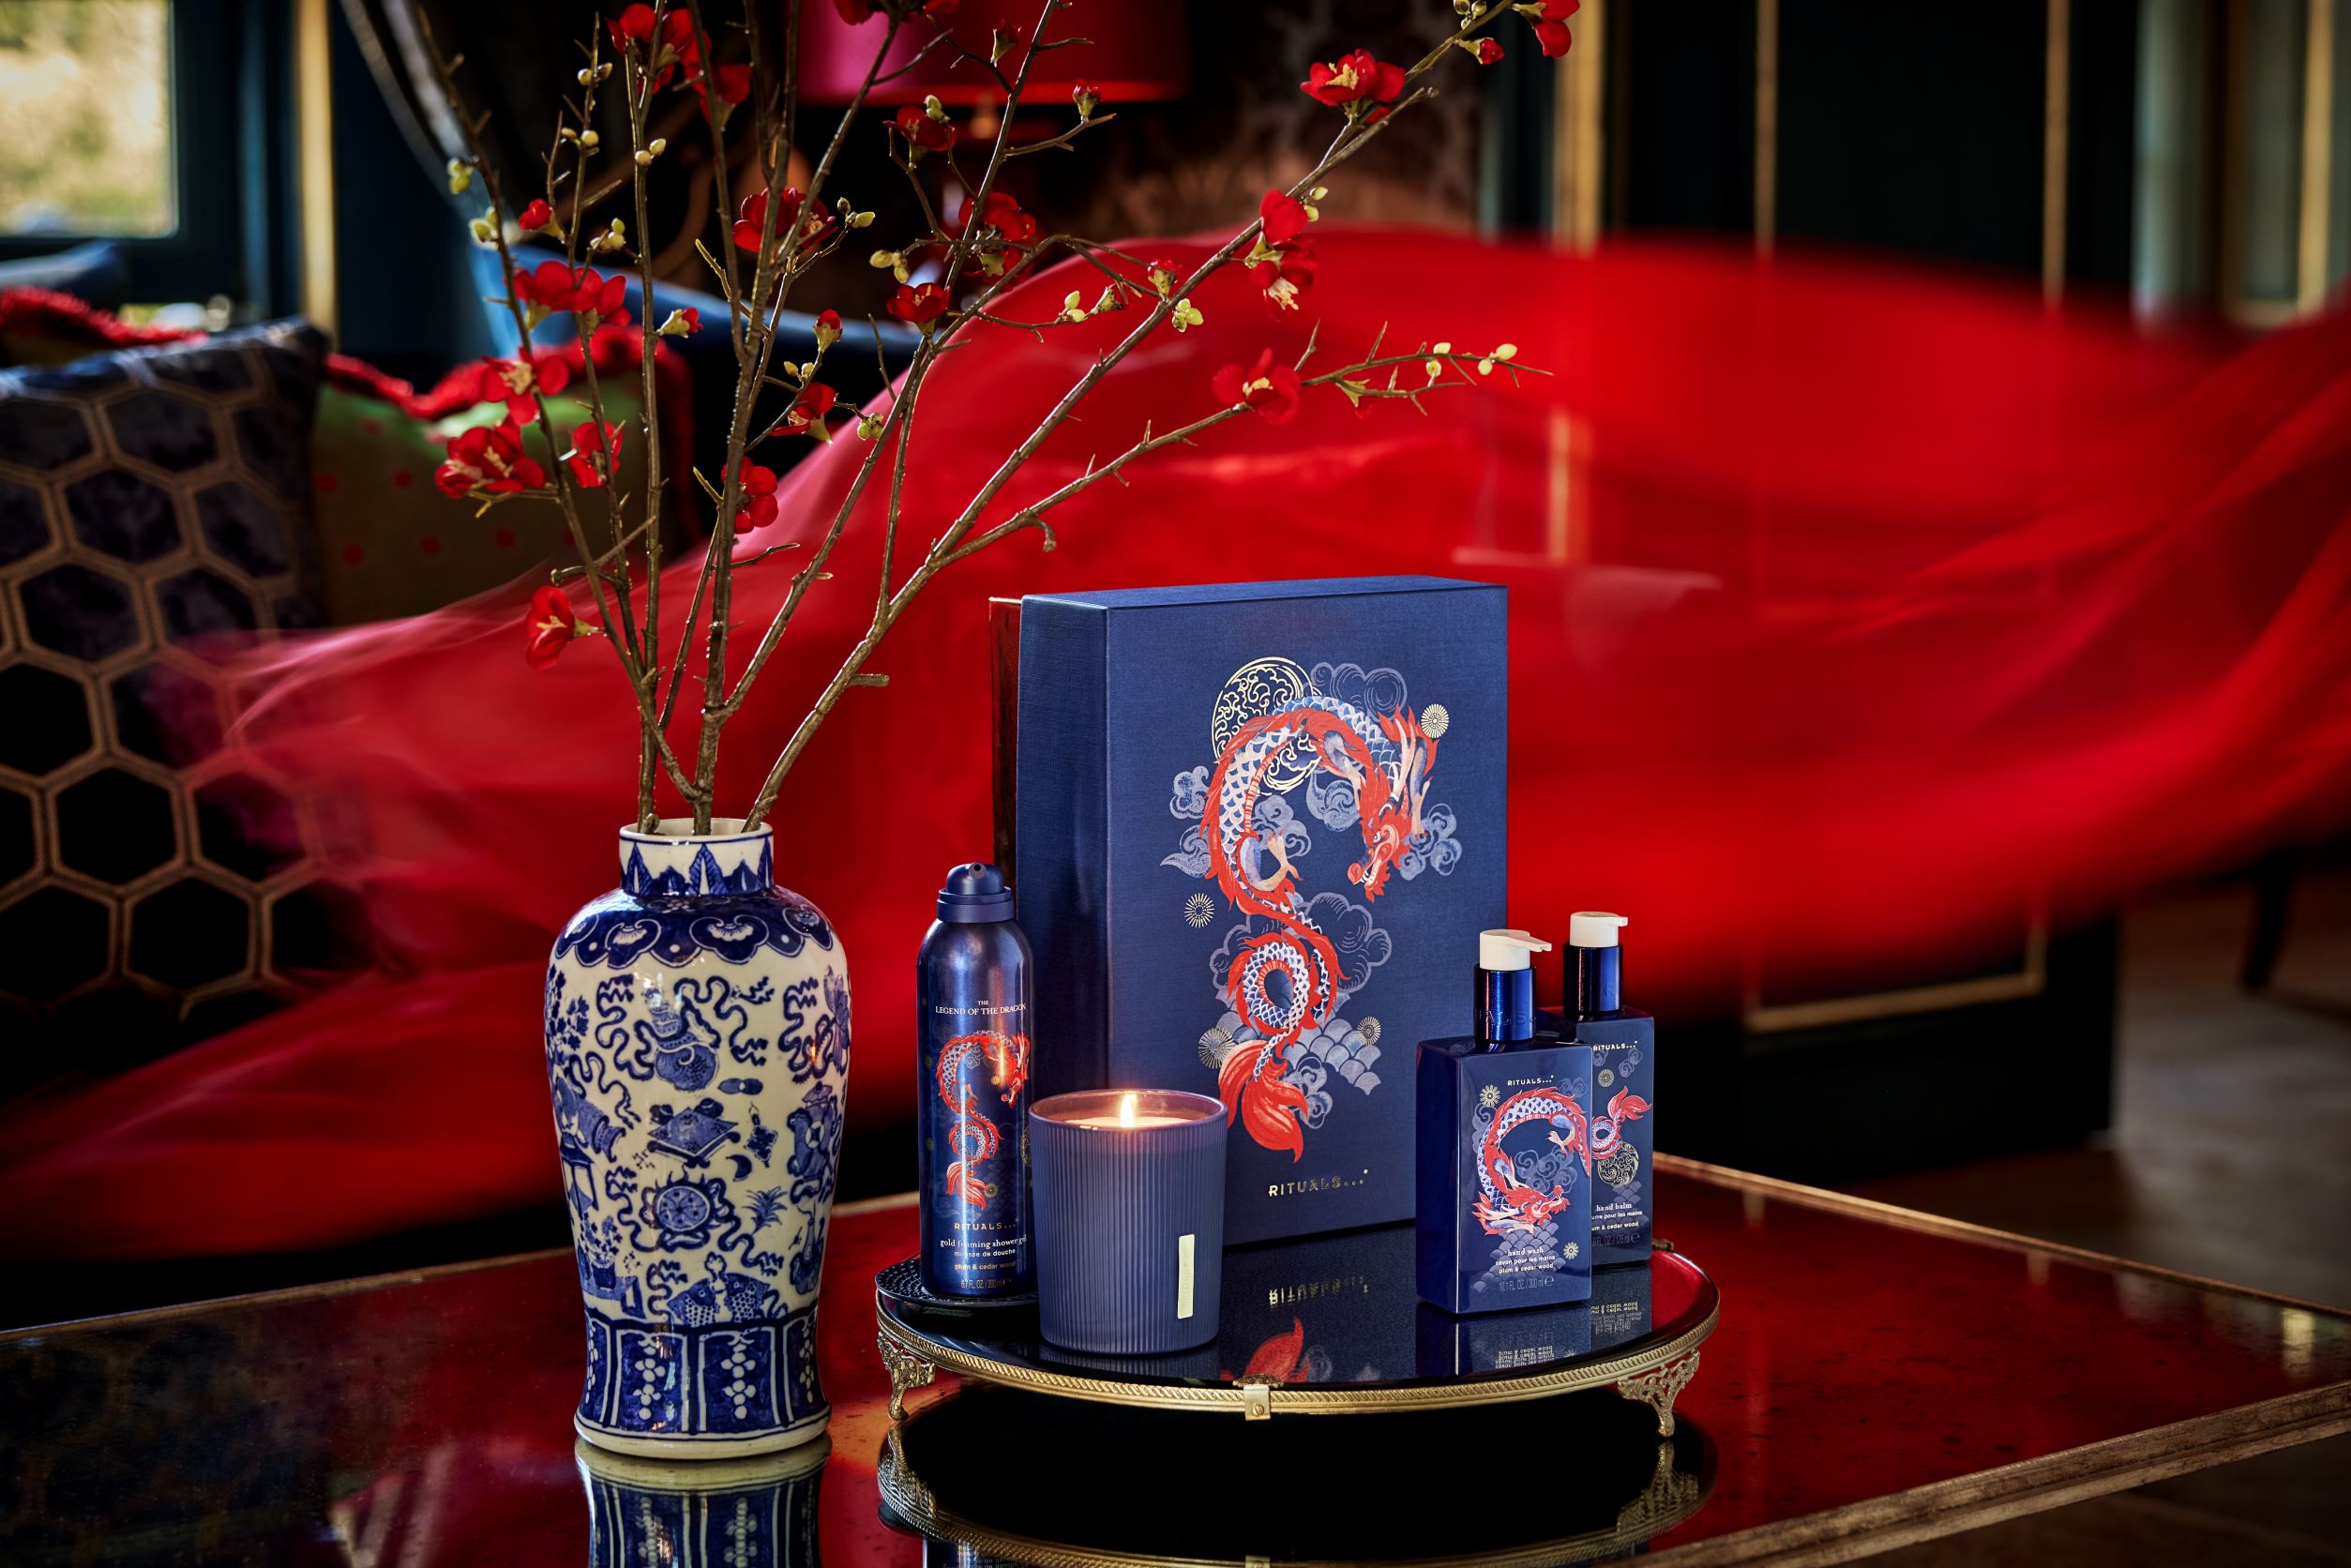 Immerse yourself with Rituals' newest Winter Limited Edition